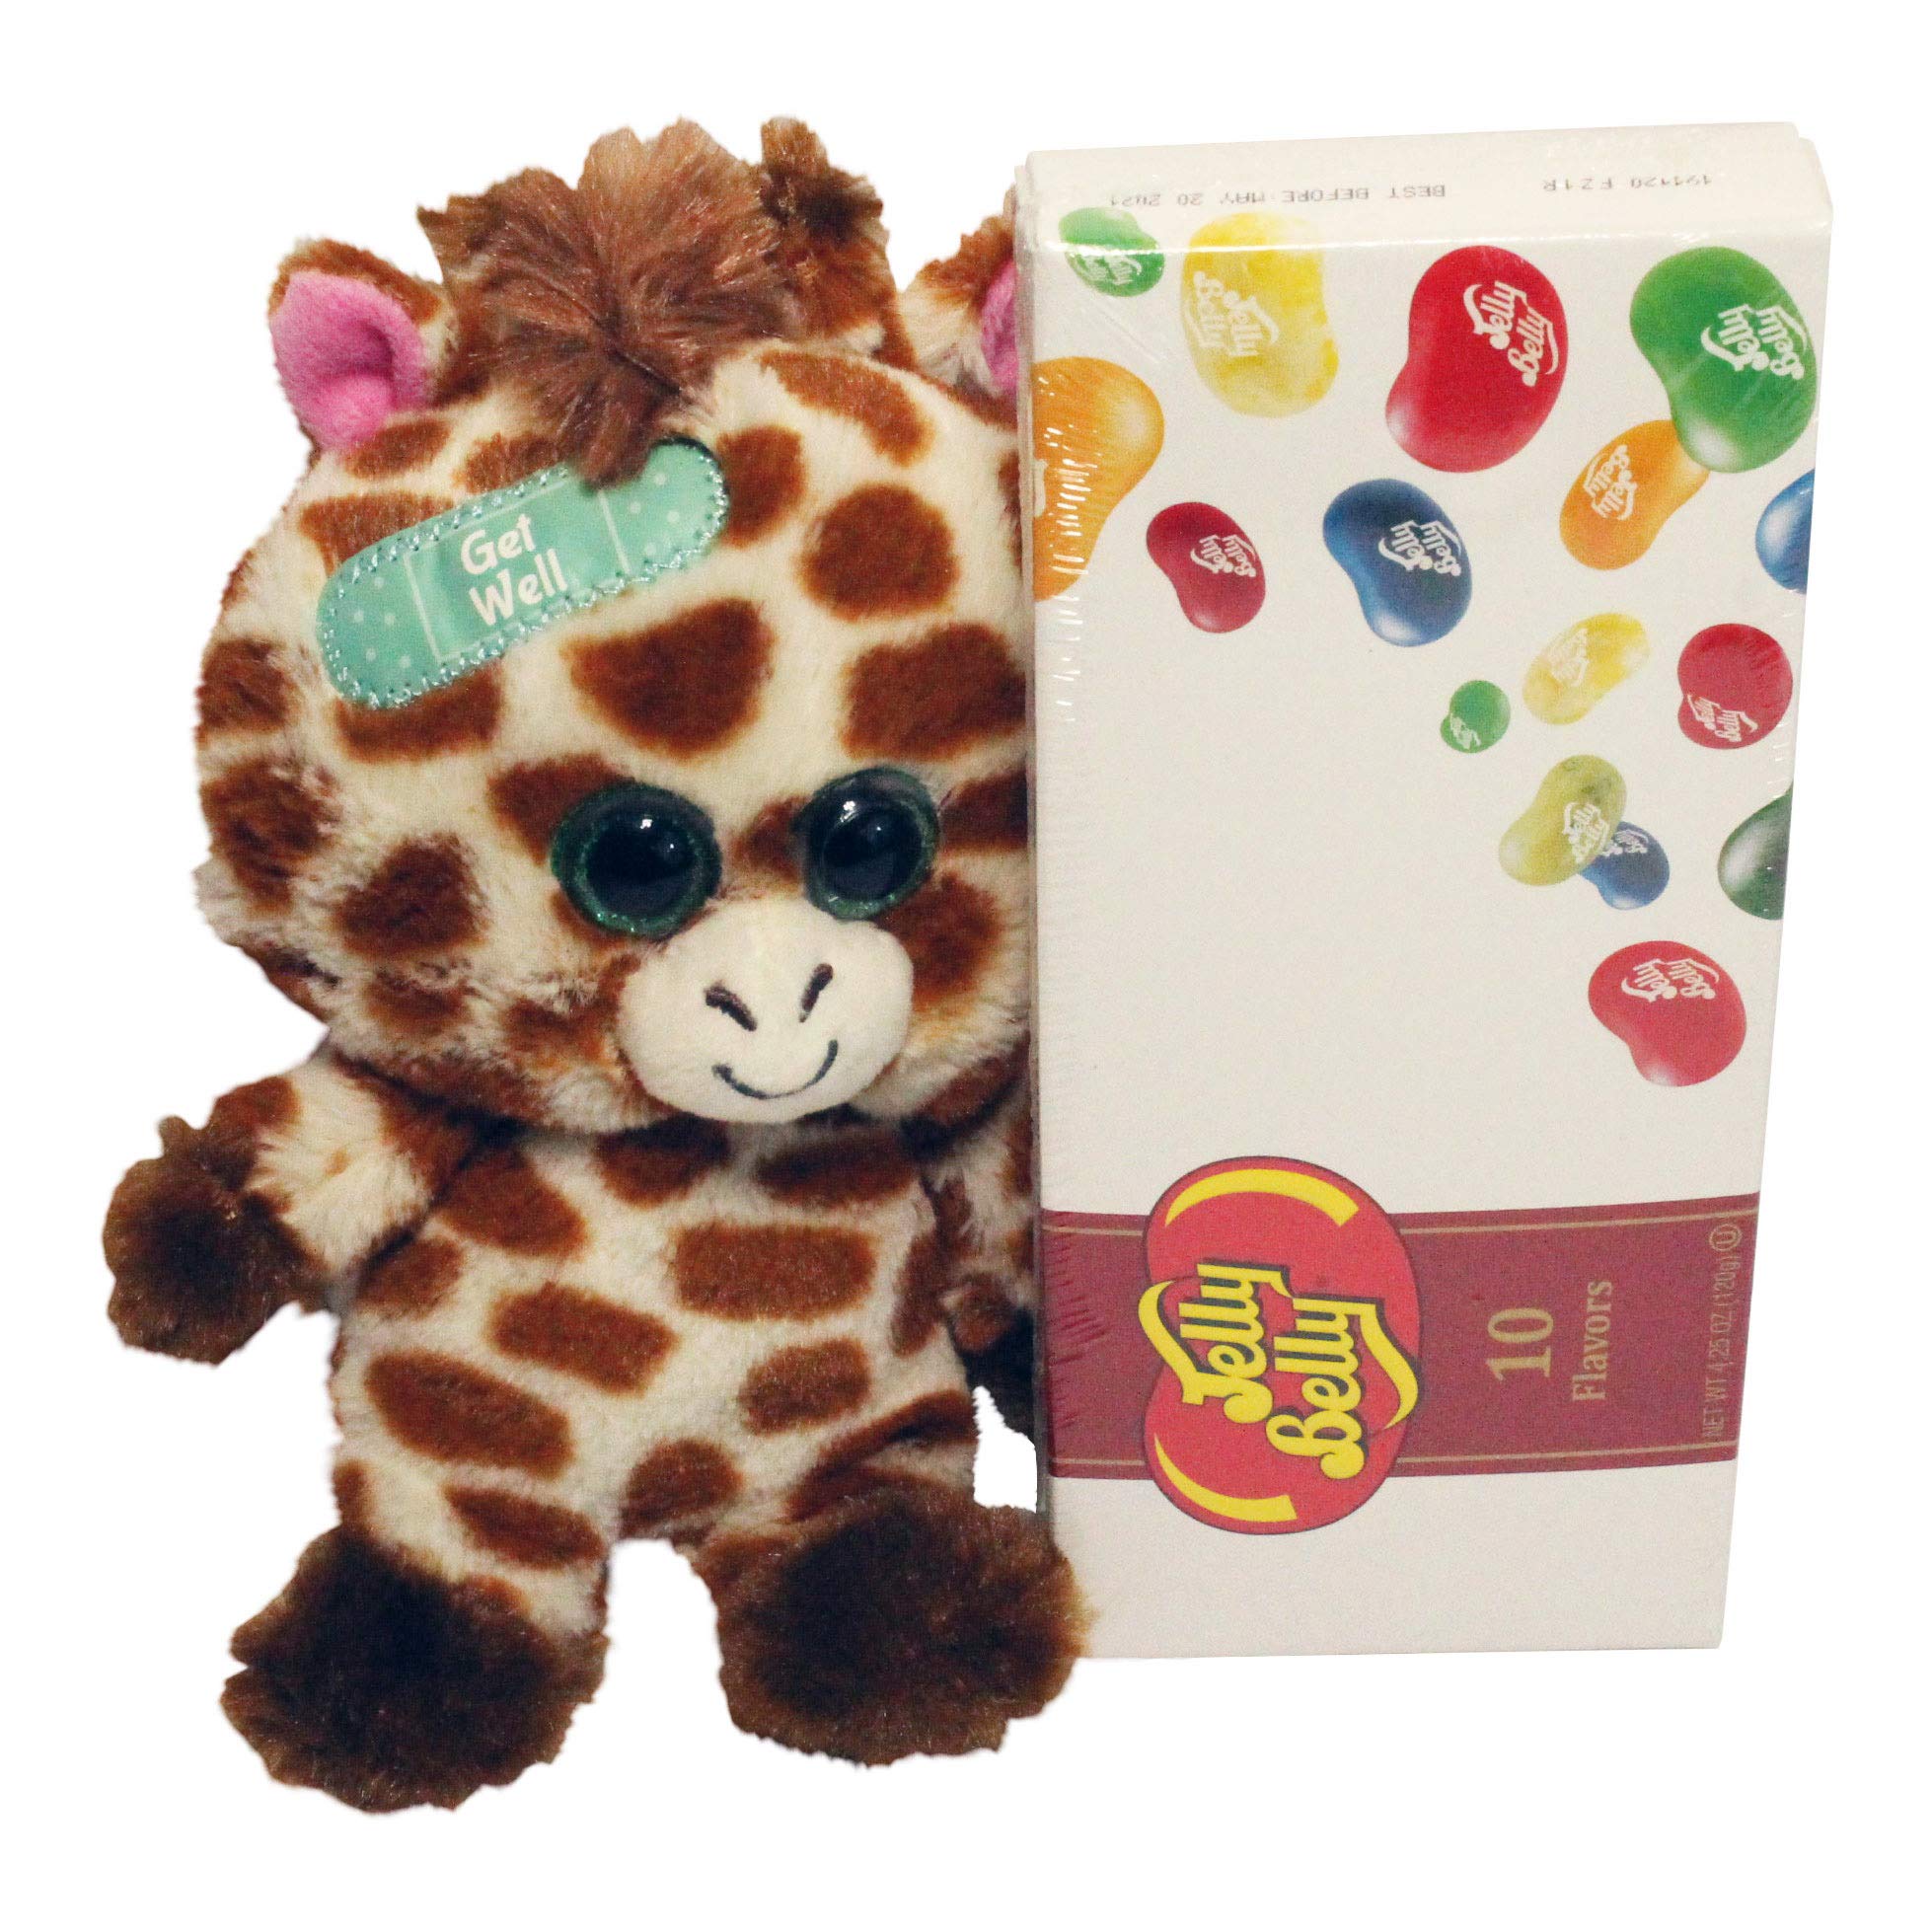 6" Beanie Boo Get Well Plush Friend Gift Set - Comes with Jelly Belly Gift Box, Comes in a gift bag